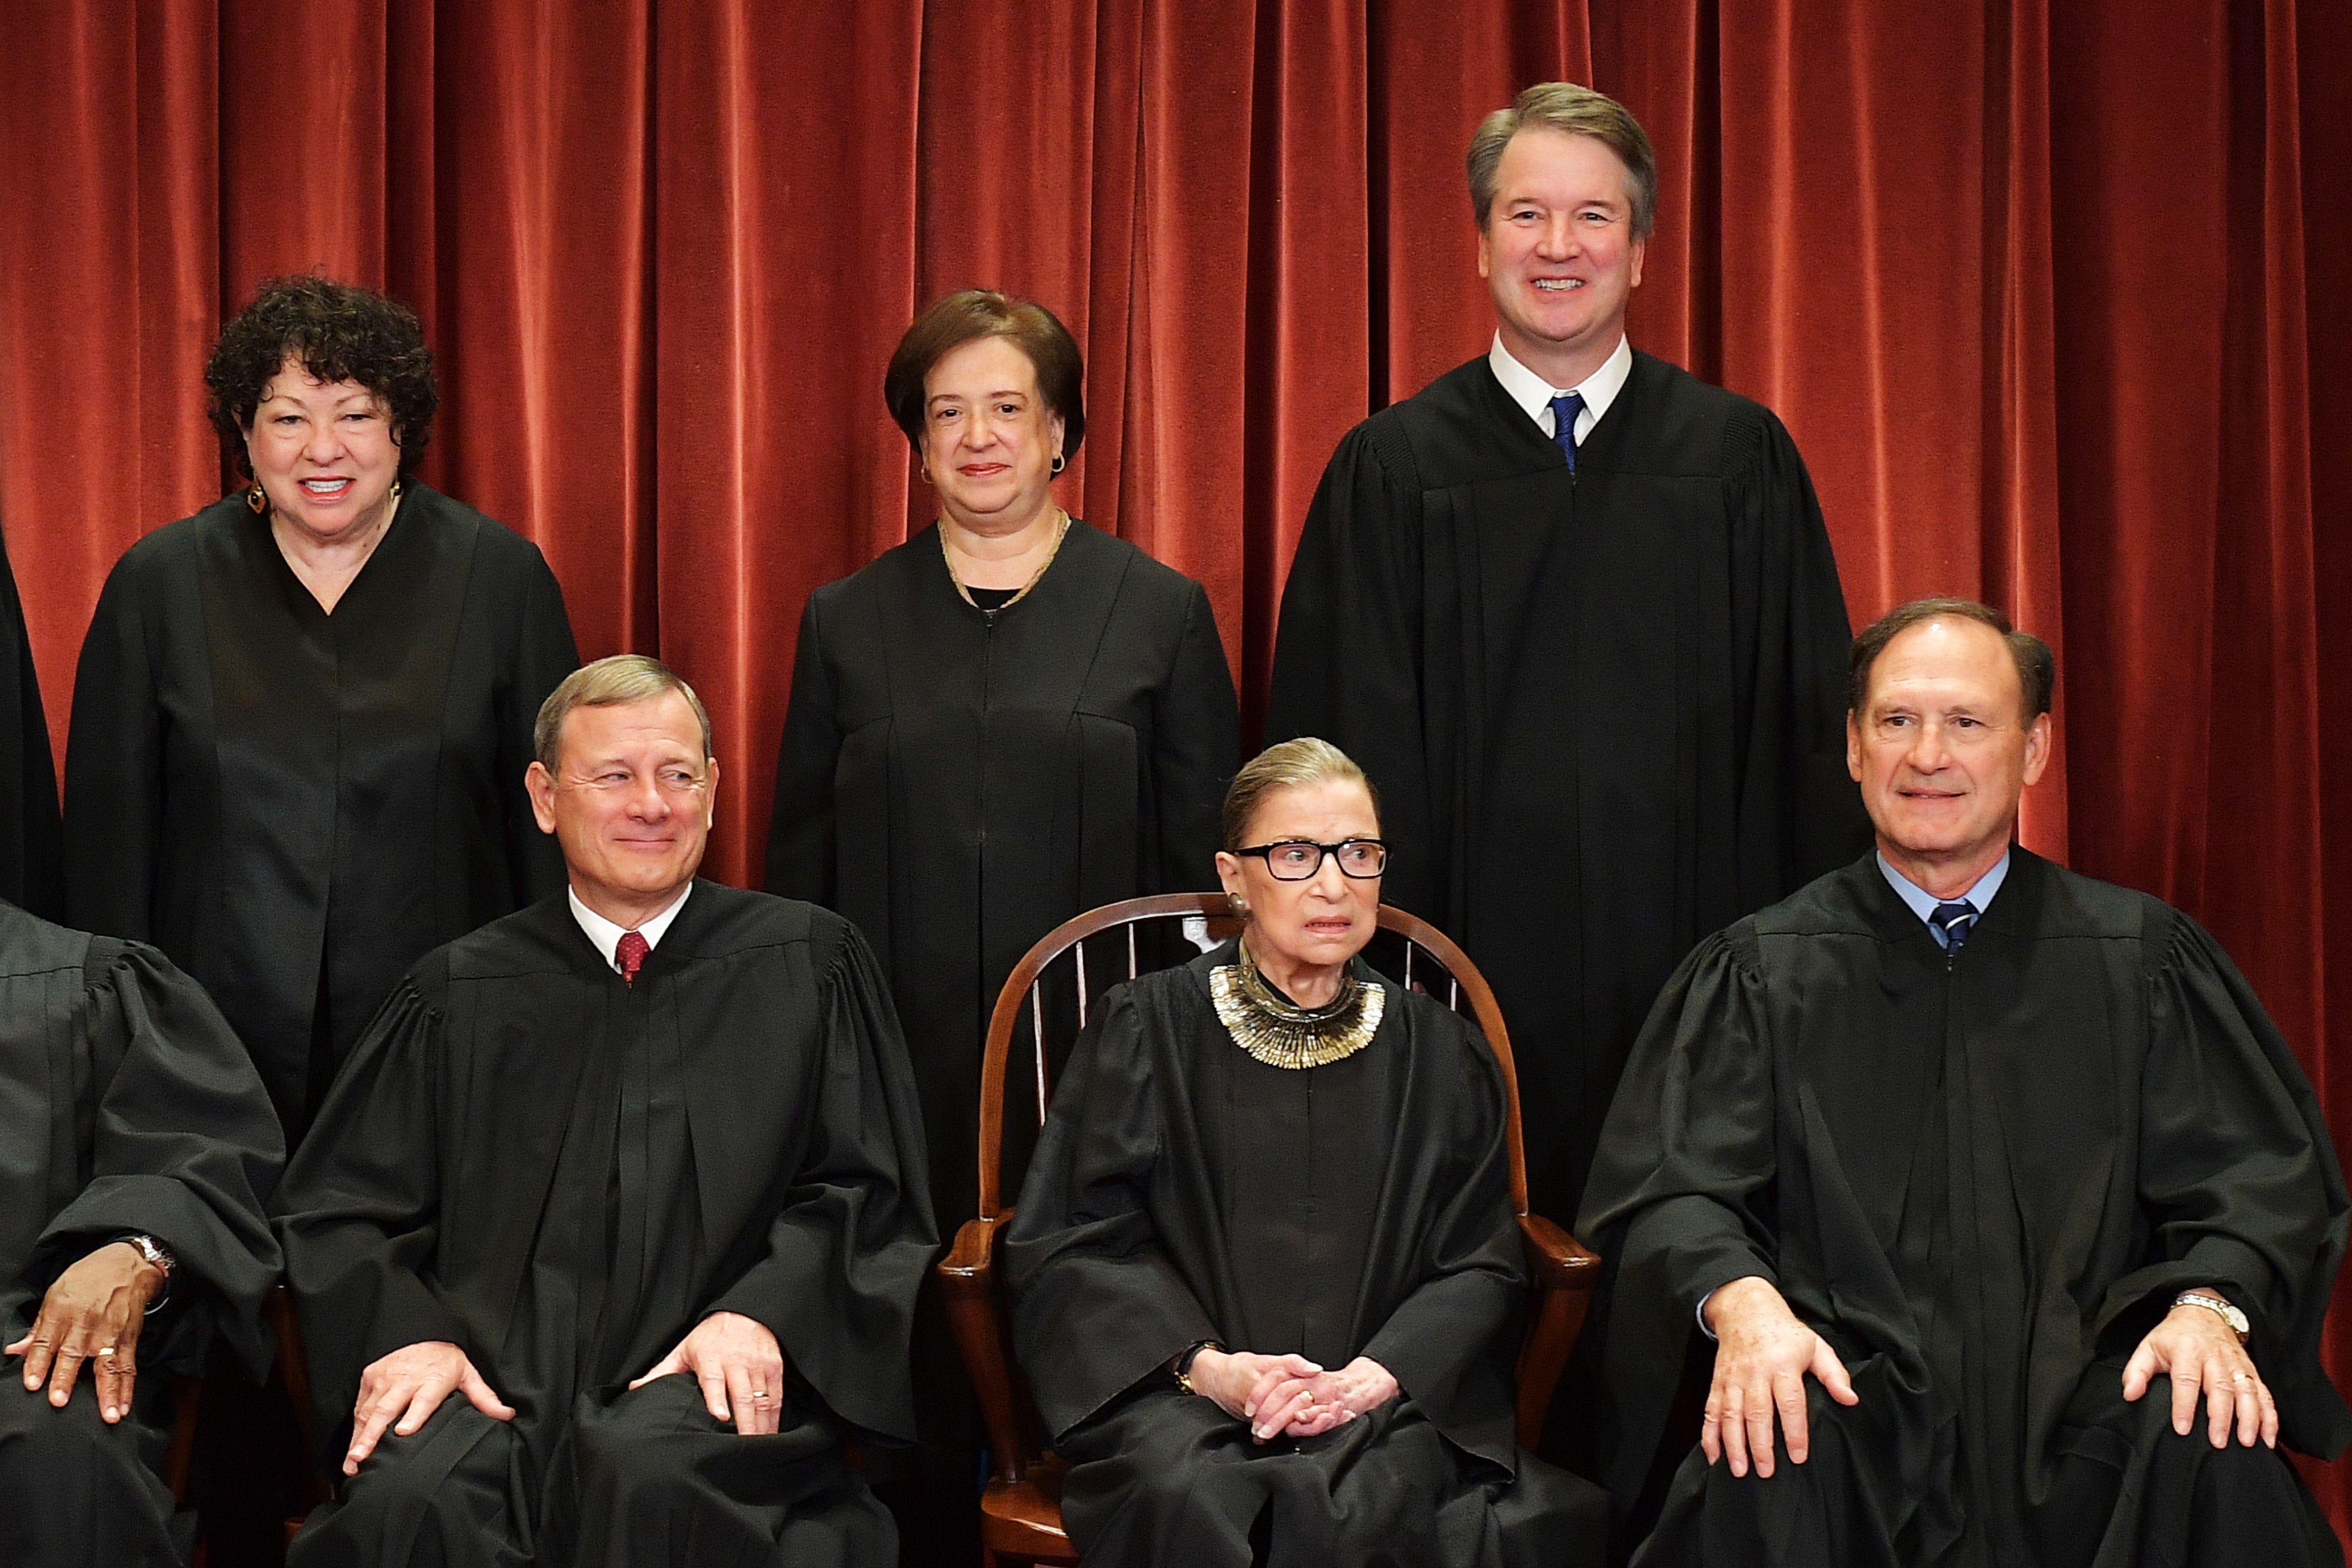 Seated from left: Chief Justice John Roberts with Associate Justices Ruth Bader Ginsburg and Samuel Alito. Standing from left: Associate Justices Sonia Sotomayor, Elena Kagan, and Brett Kavanaugh.